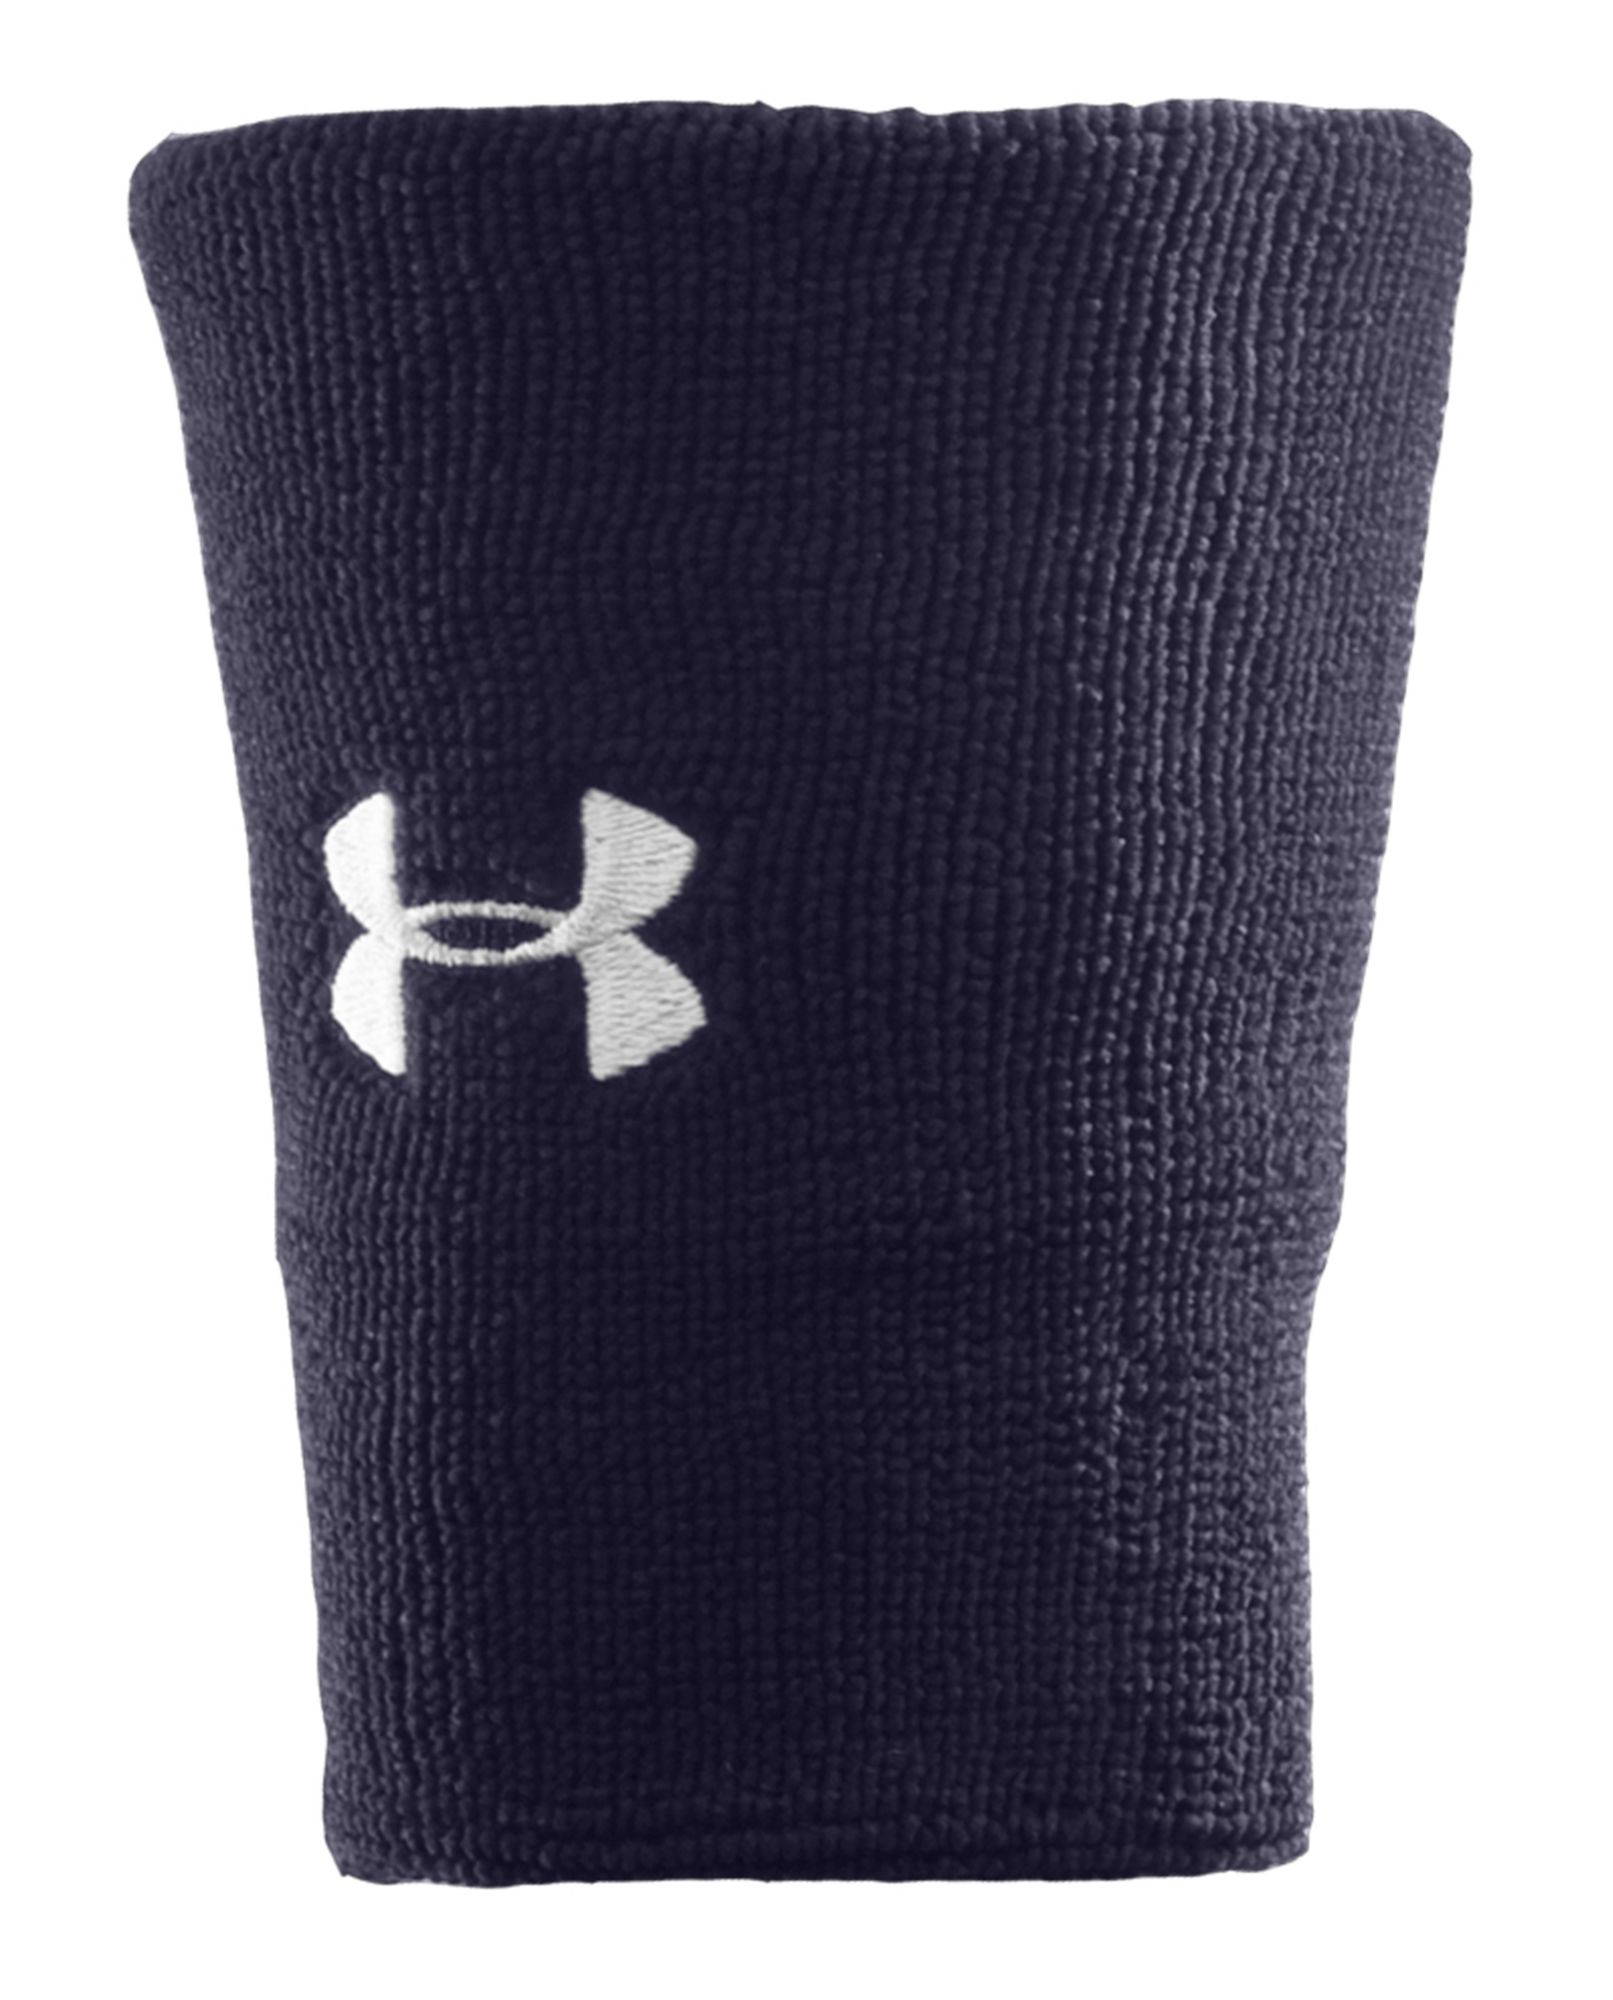 Under Armour Performance Wristbands - 6 